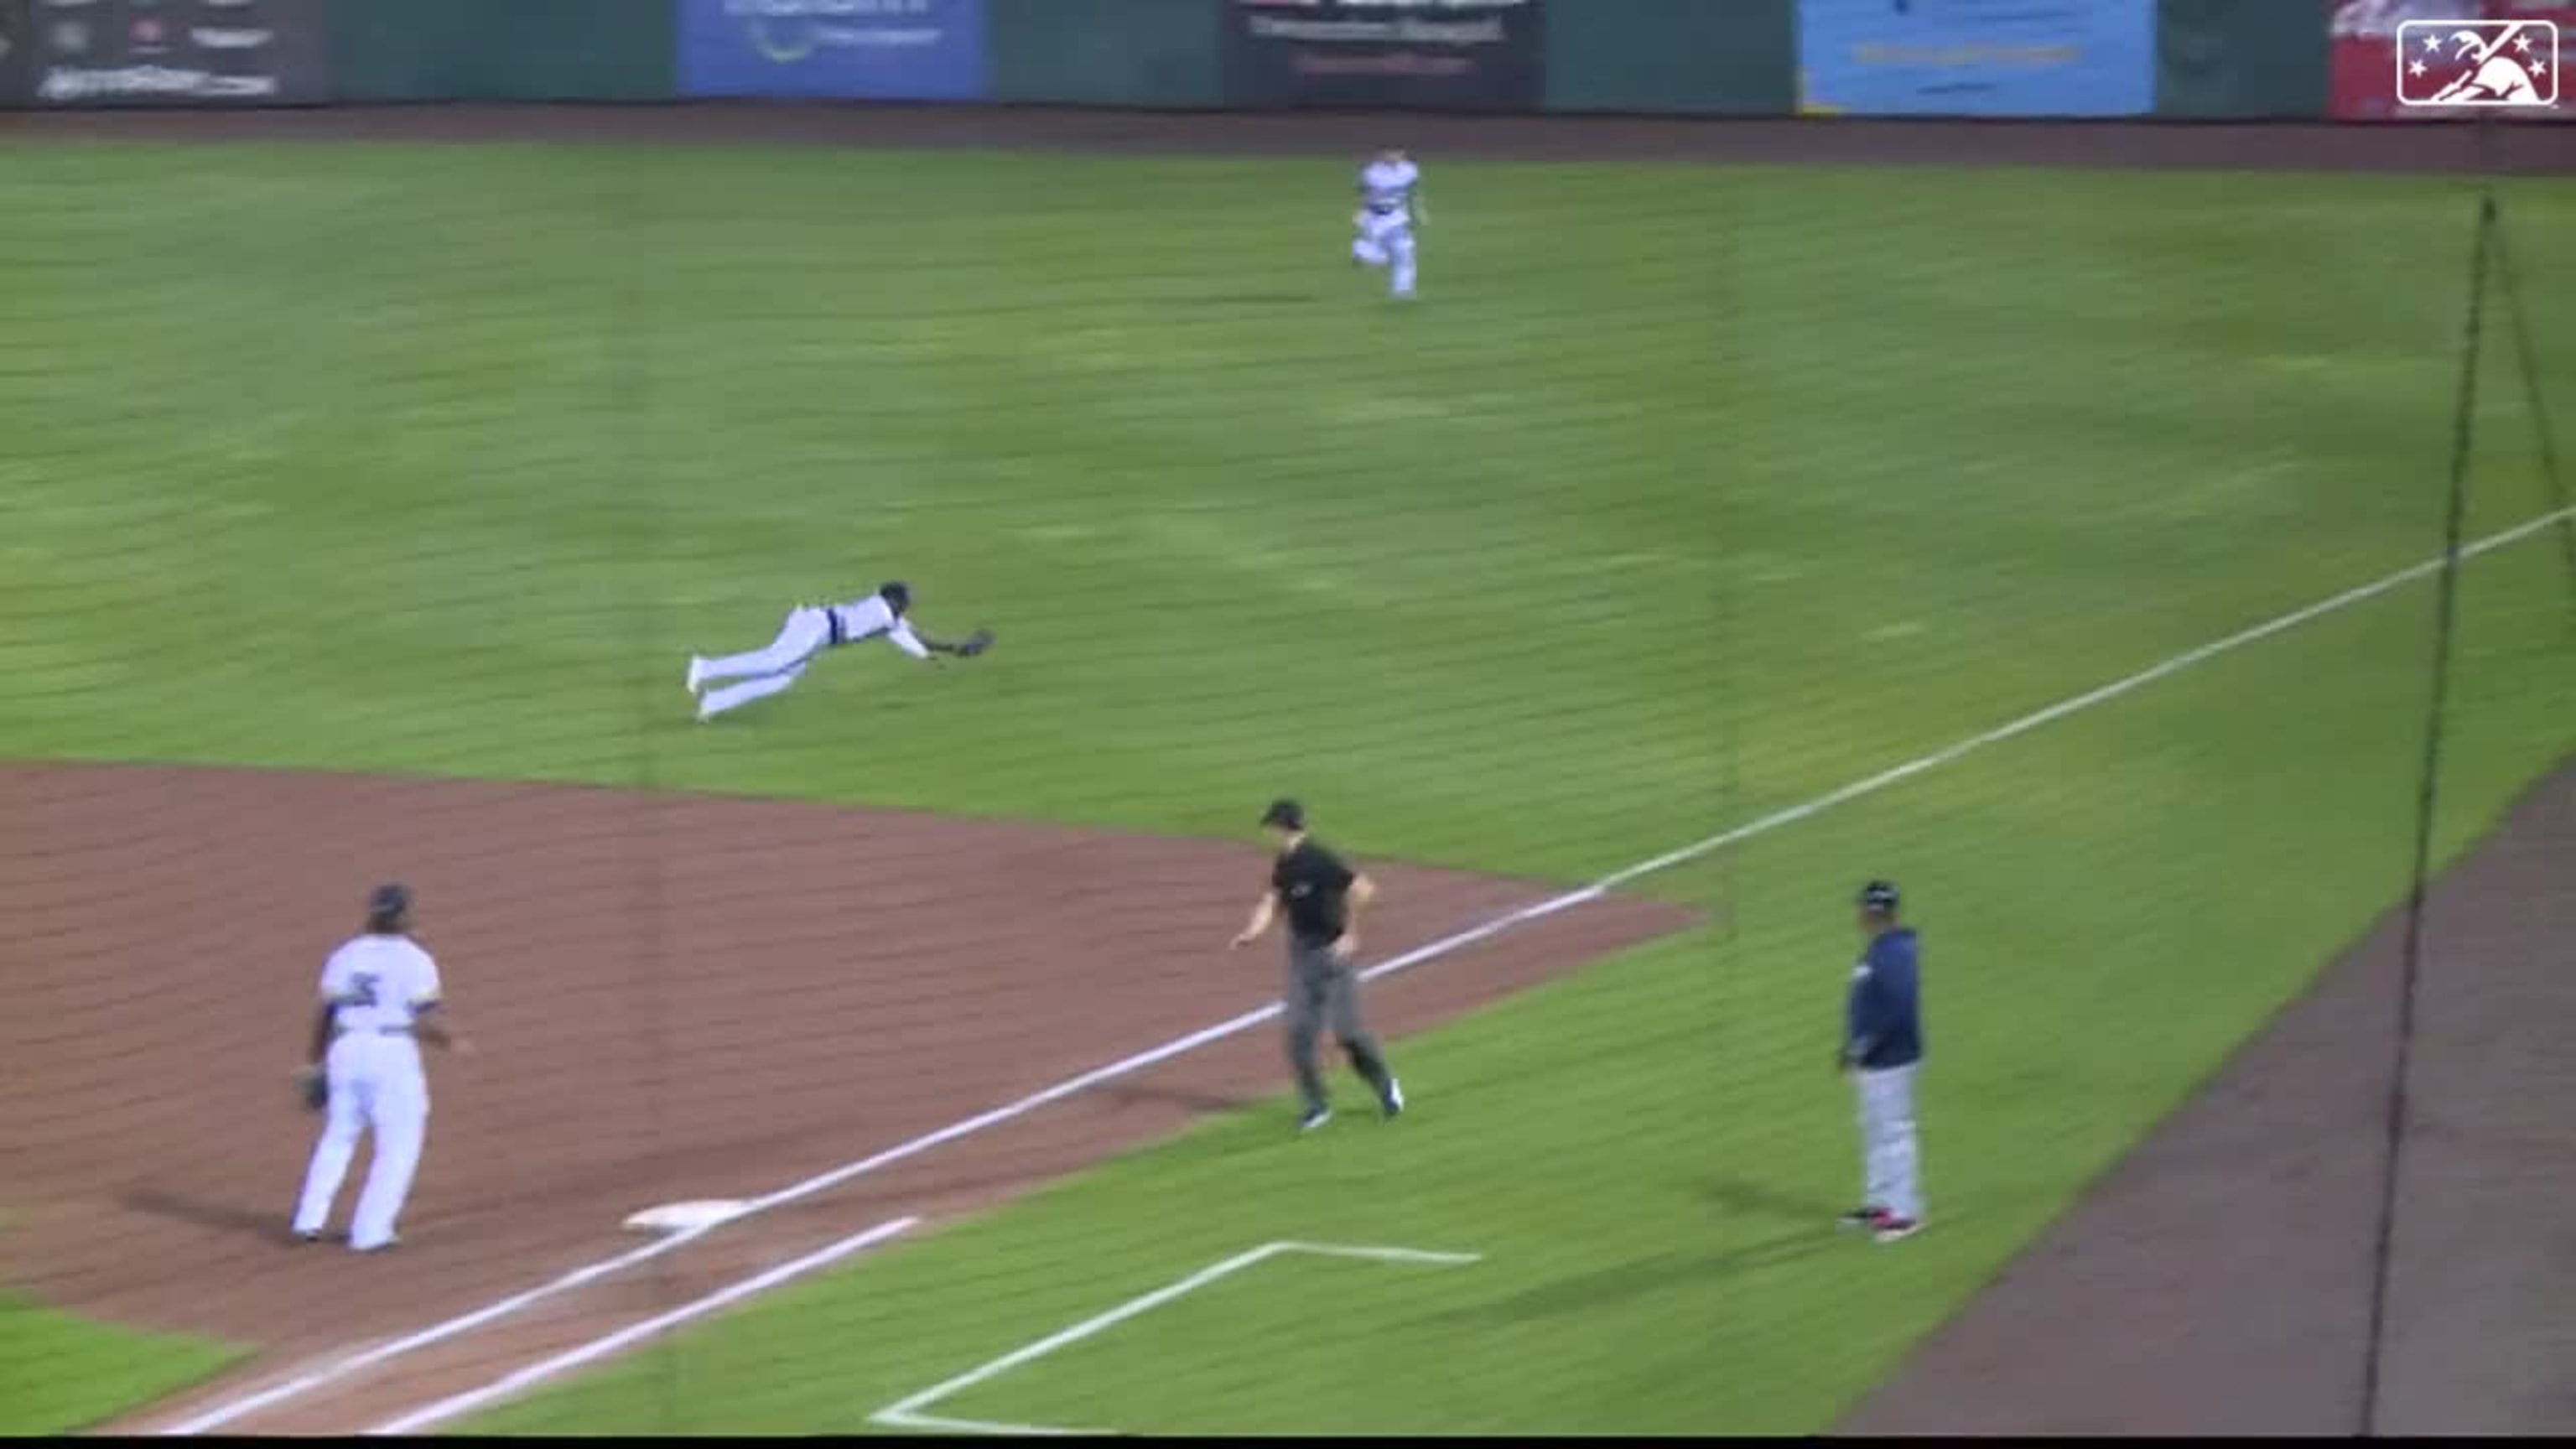 Blue Jays fan made a diving catch